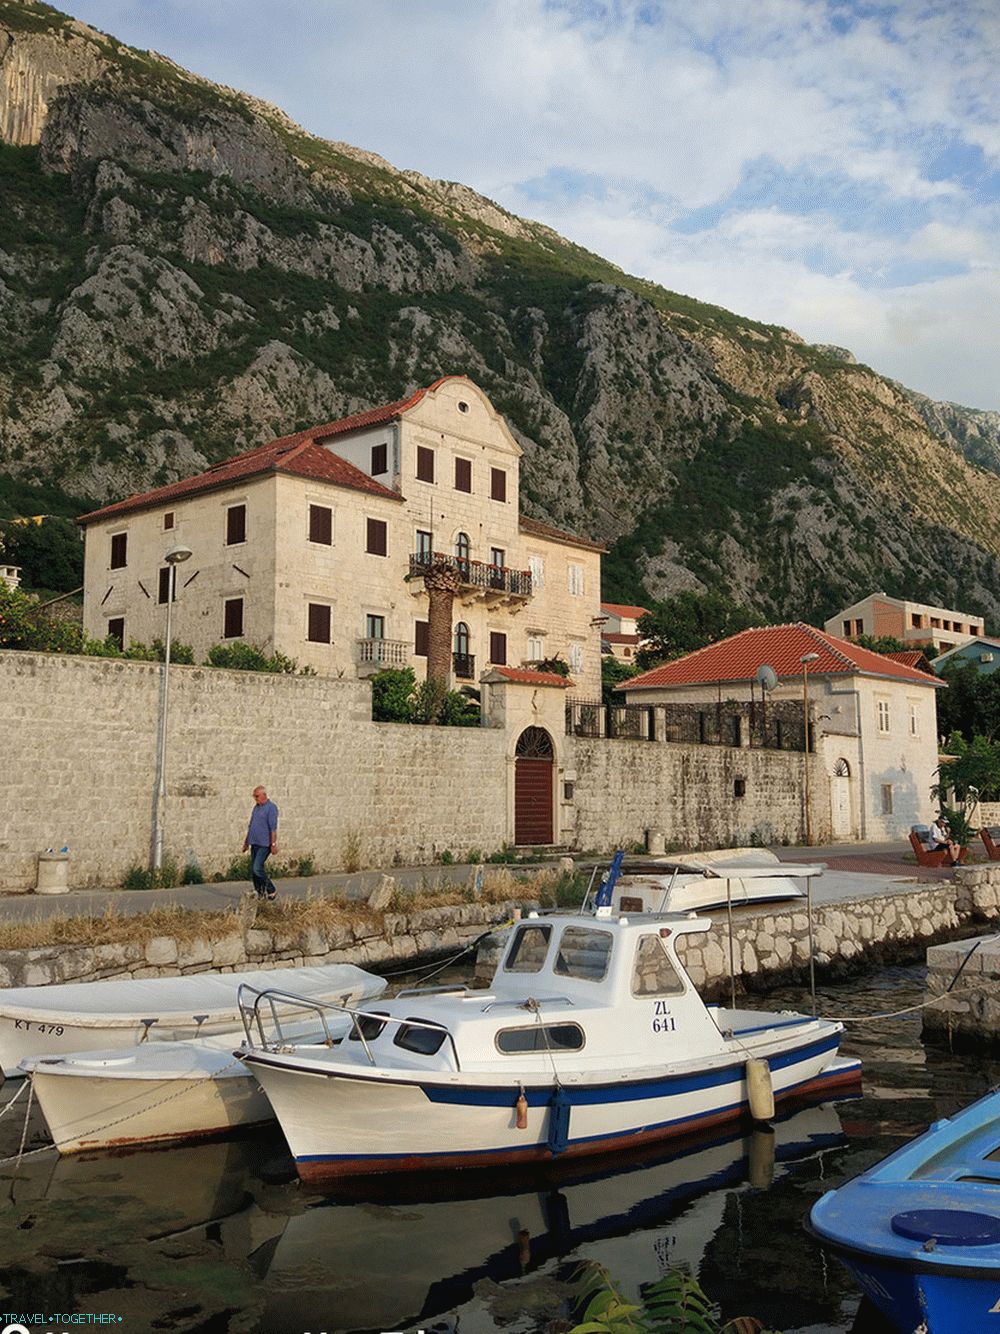 Boats off the coast in Montenegro